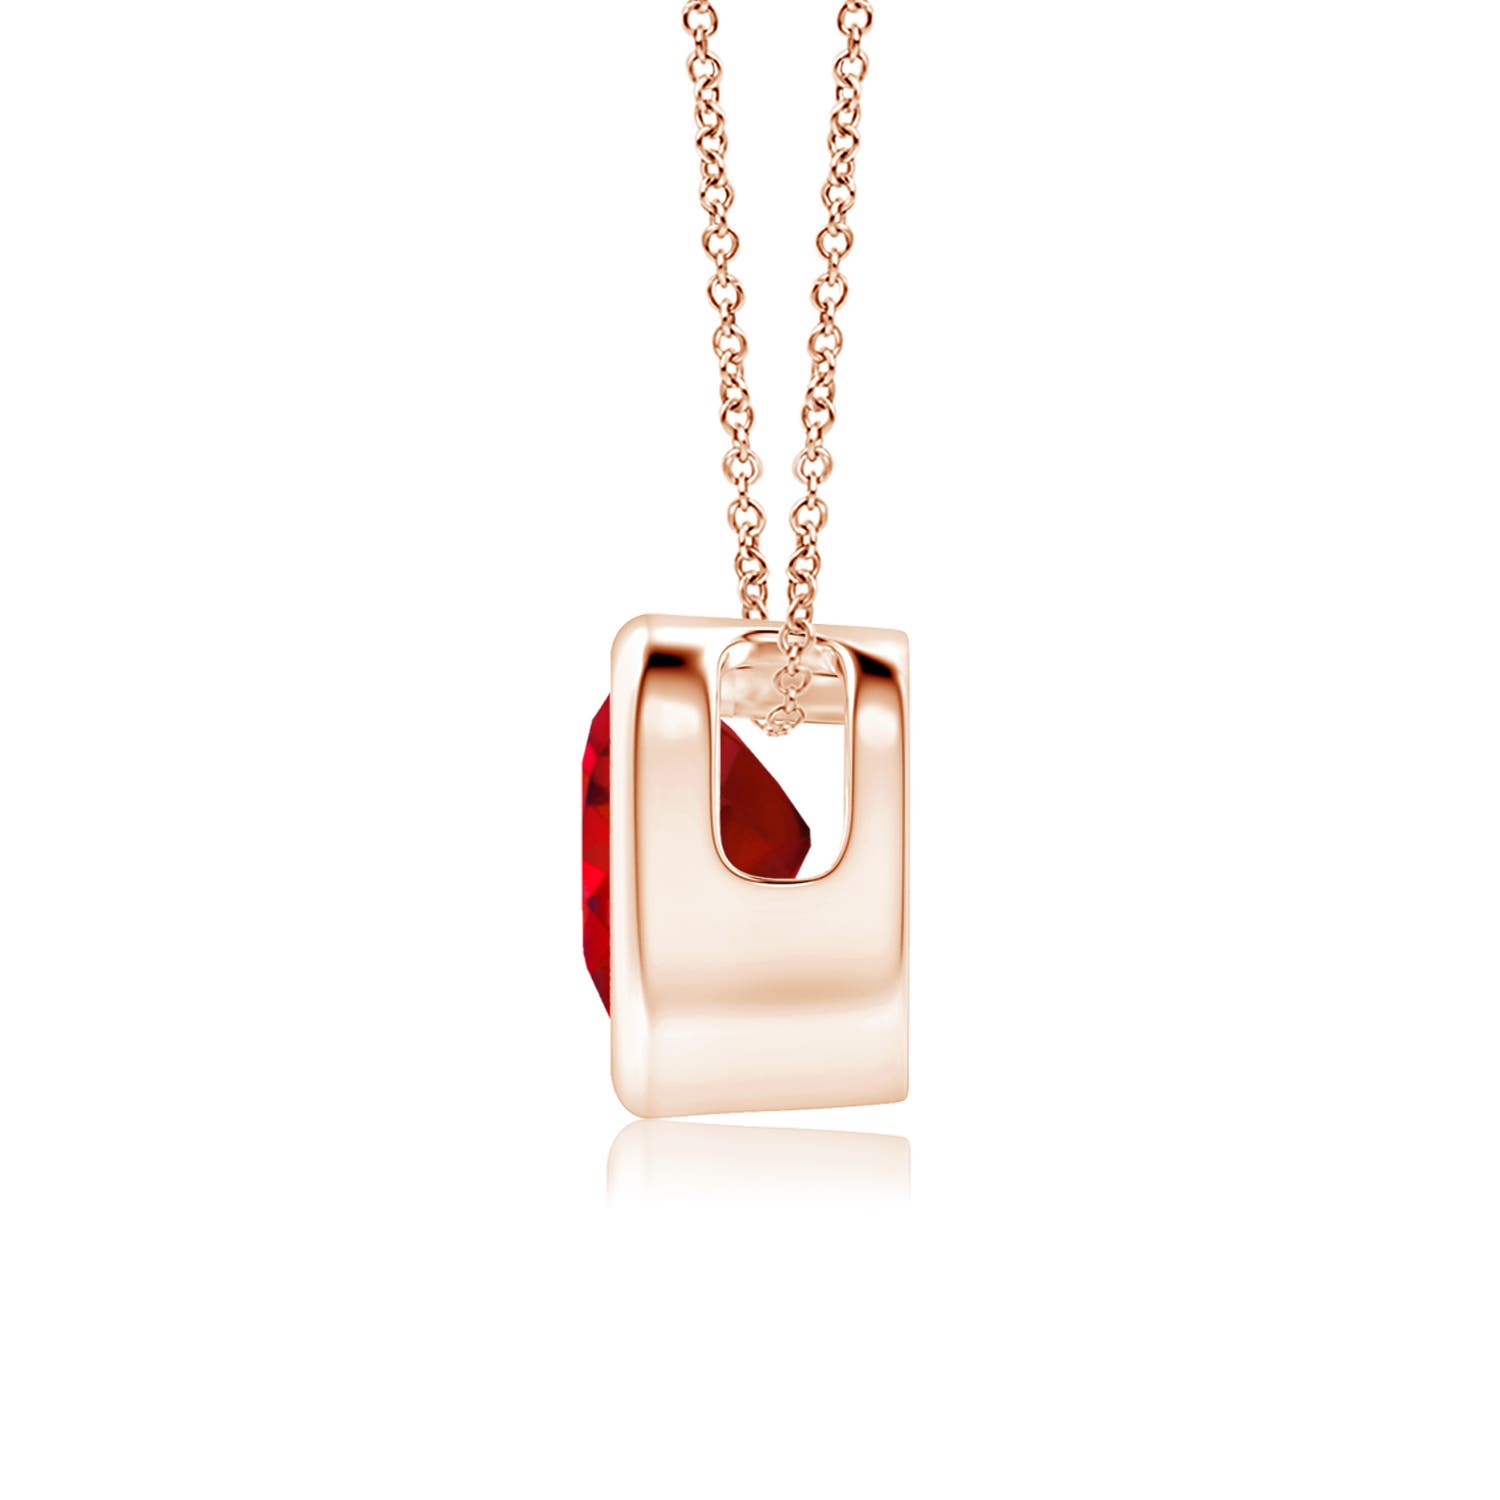 AAA - Ruby / 0.55 CT / 14 KT Rose Gold